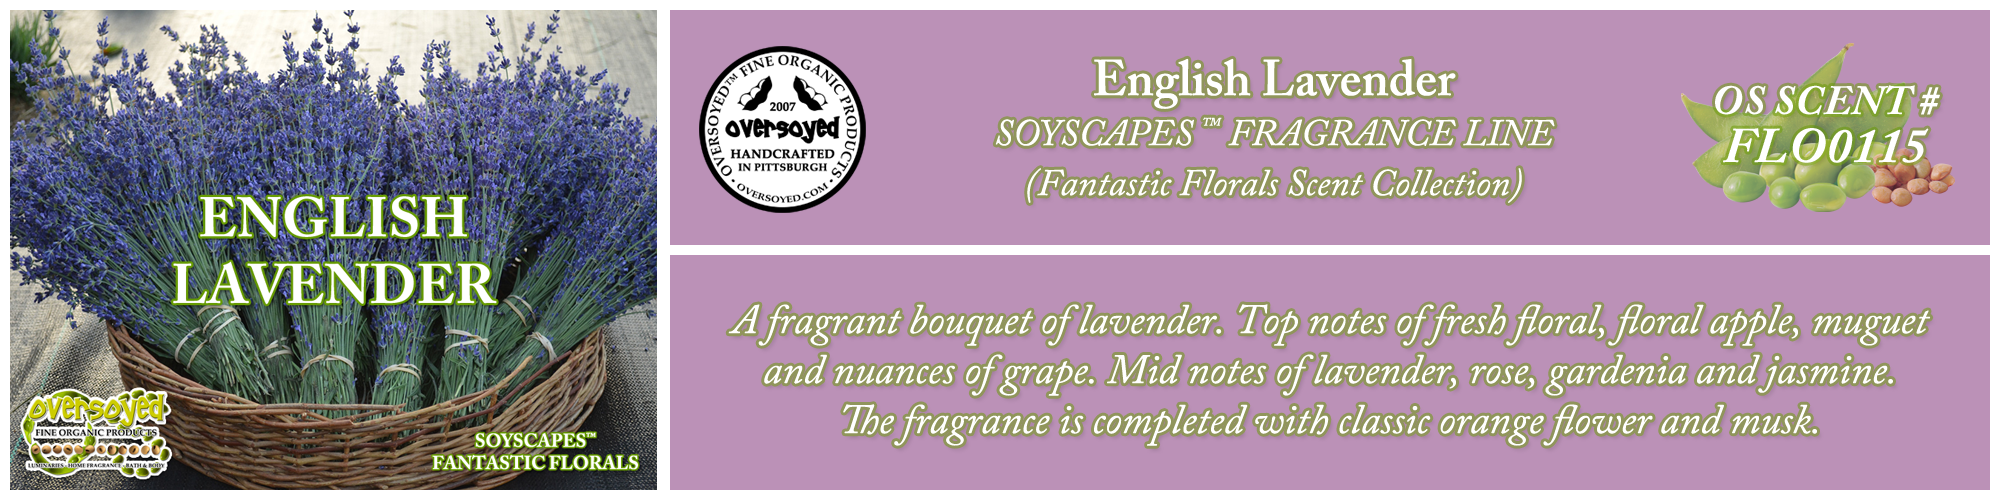 English Lavender Handcrafted Products Collection